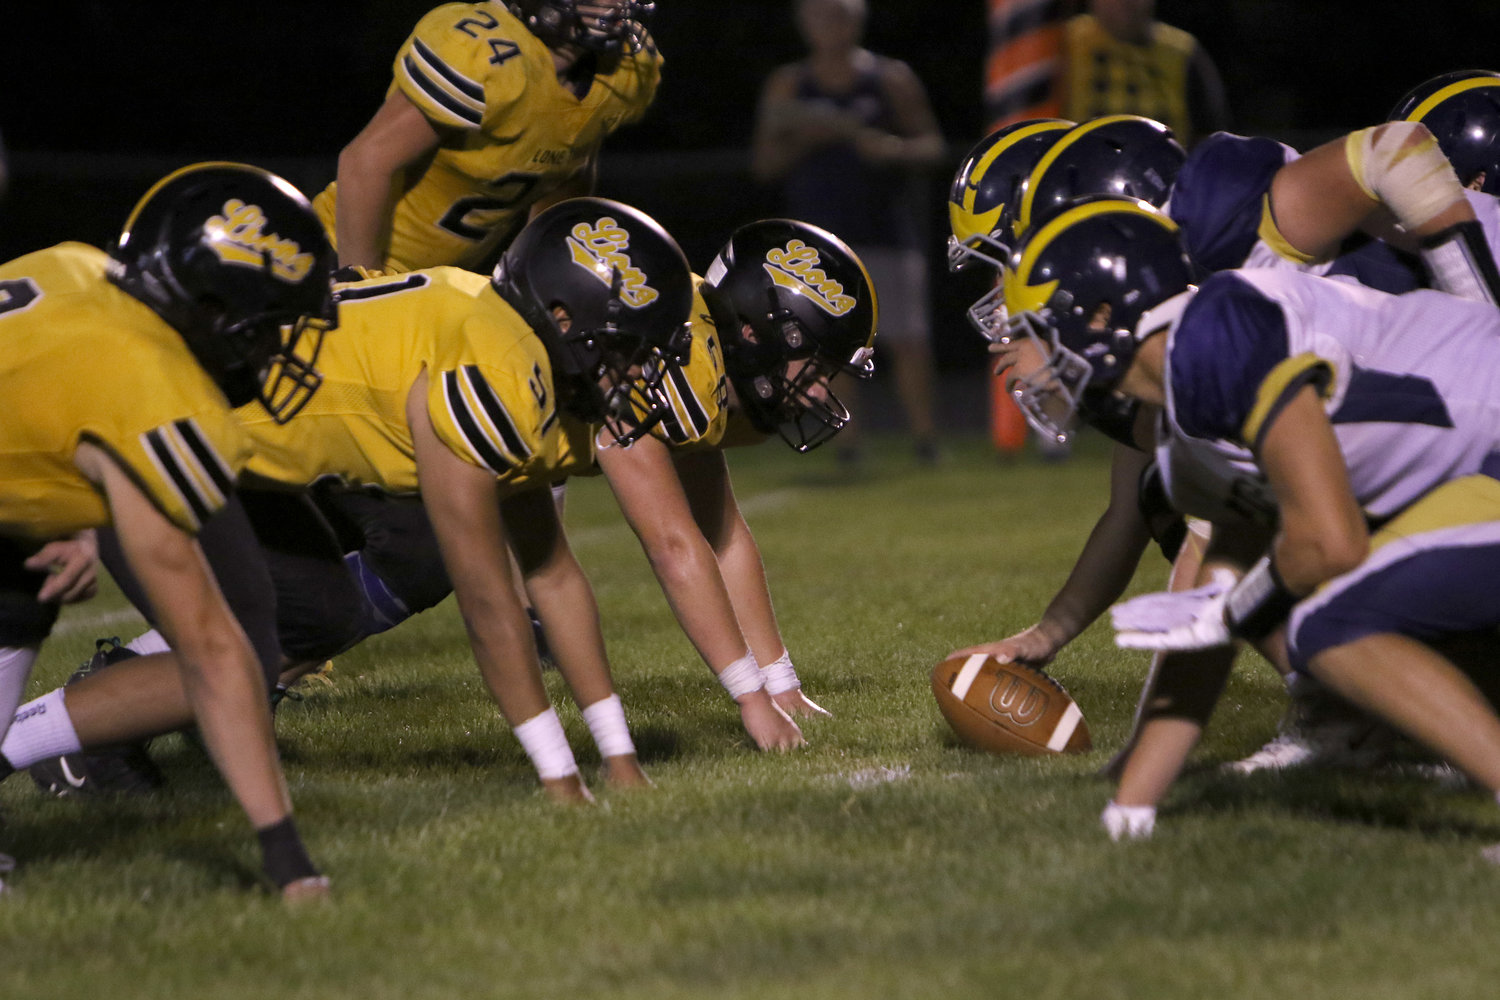 The Lion defensive line waits on the snap during Lone Tree's 49-24 win over English Valleys.